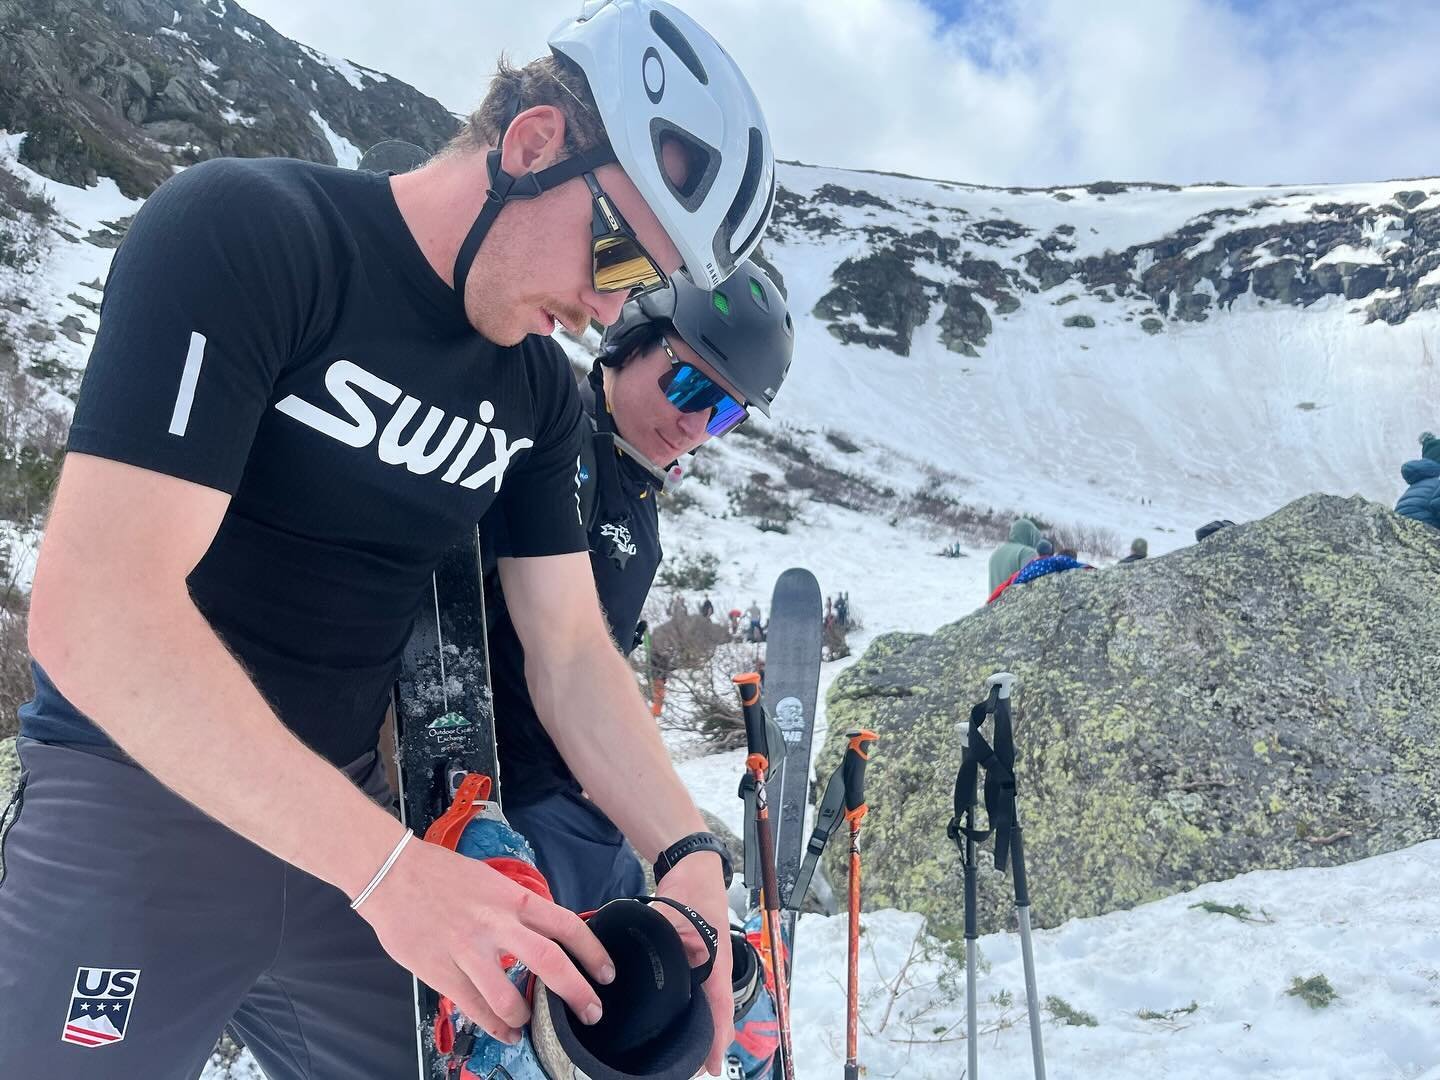 Some spring training modes require more focus than others&hellip; I can officially say that skiing the steeps off Mount Washington requires you to be locked in. For that reason I&rsquo;m only choosing @oakleyskiing to keep my eyes on the prize 😎

@o